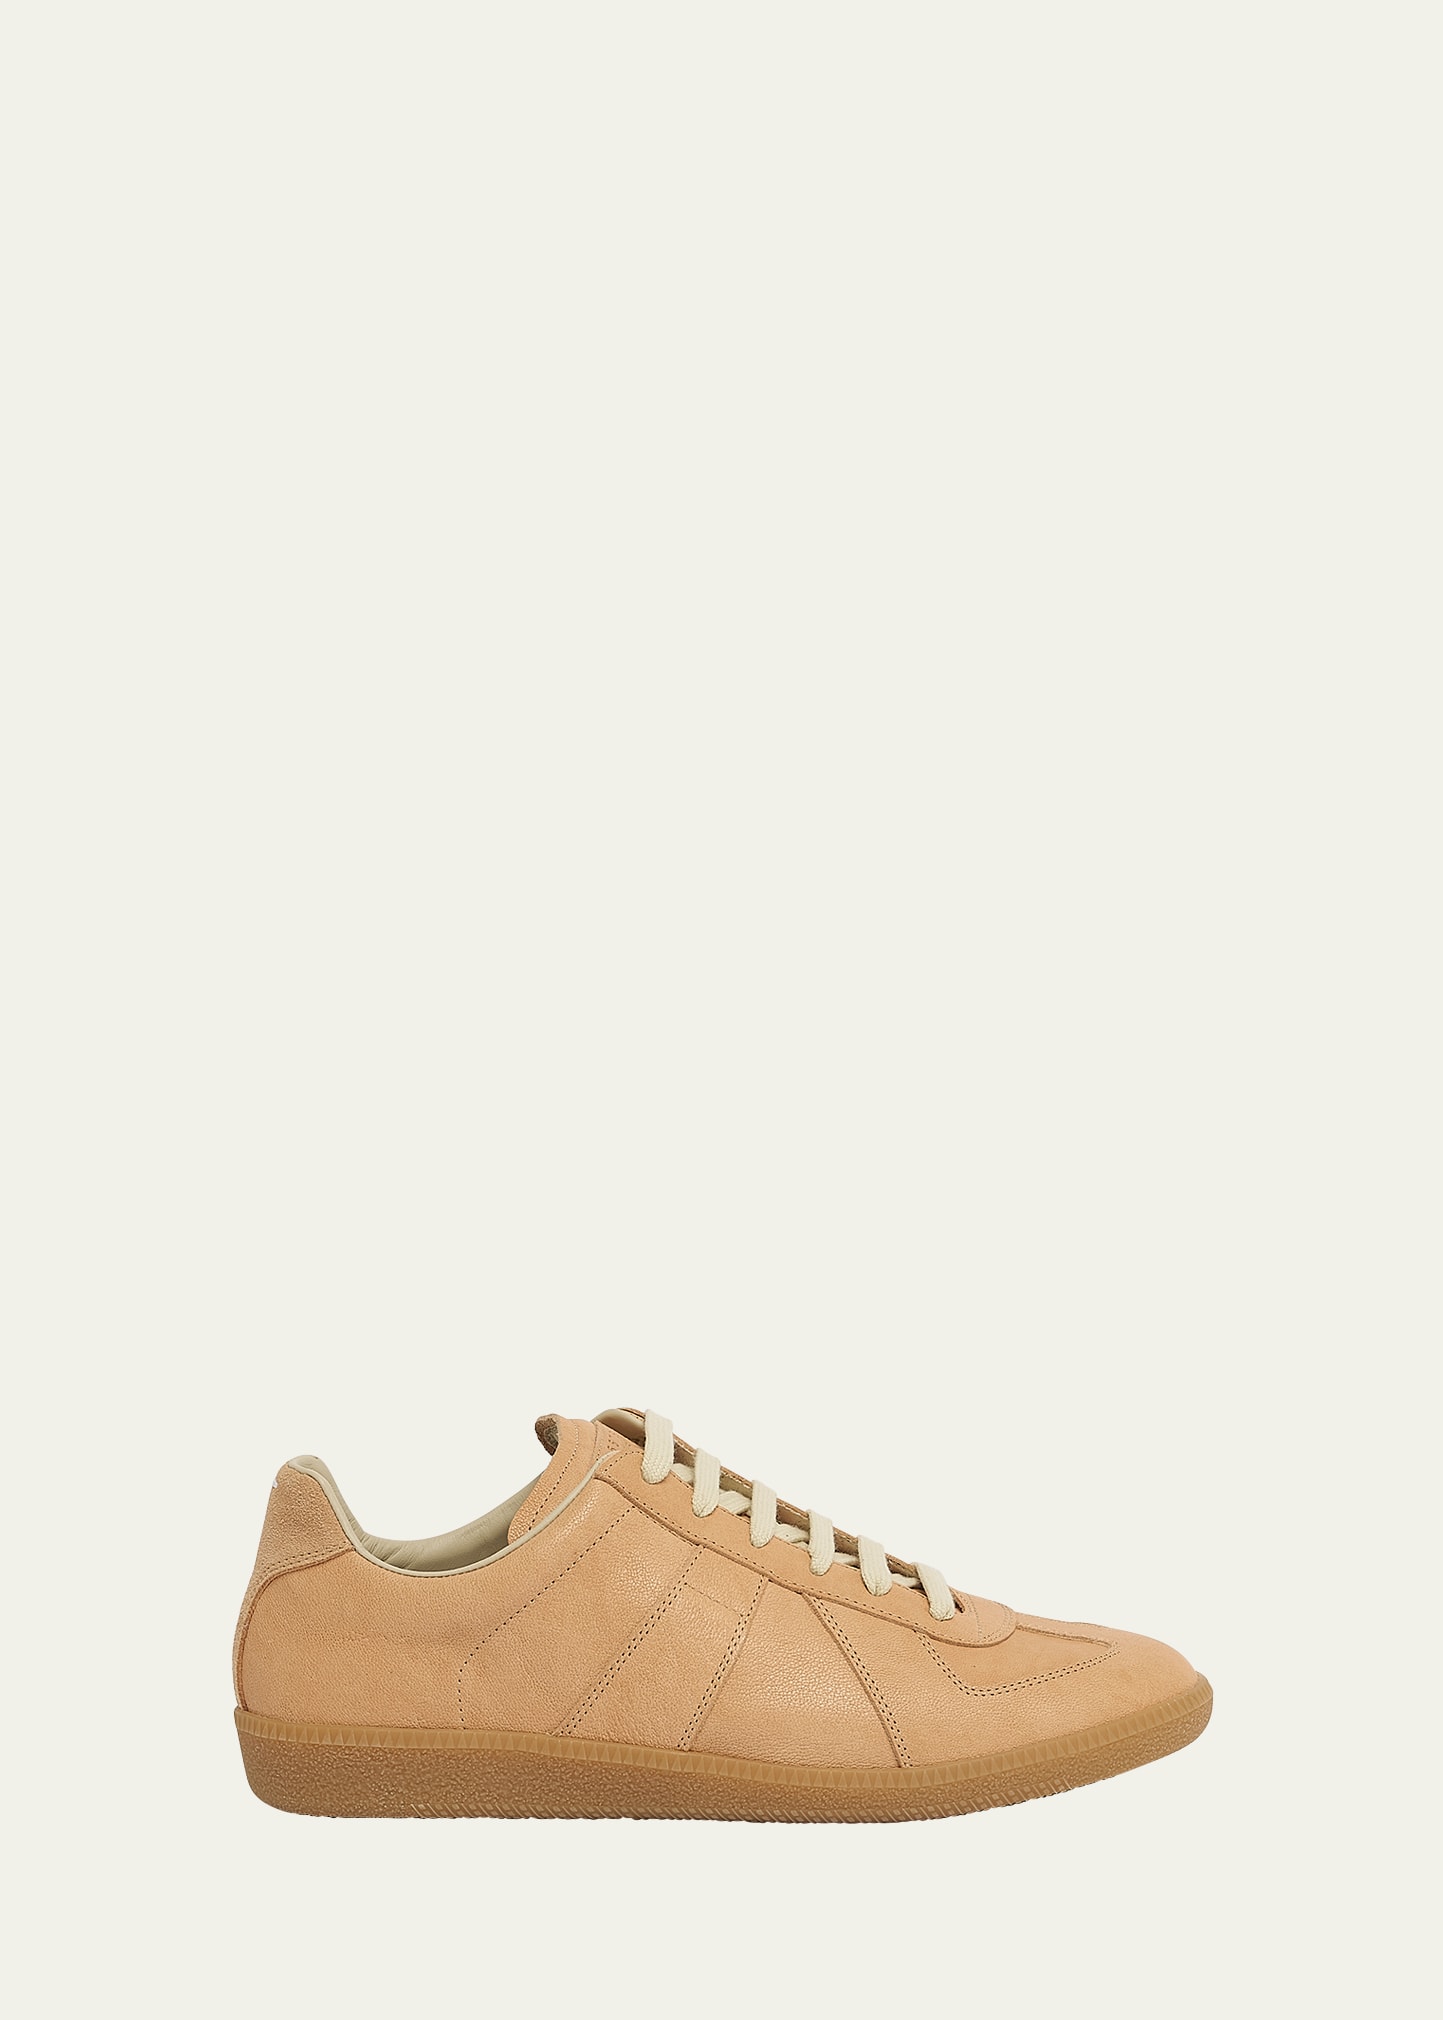 Maison Margiela Replica Mixed Leather Low-top Sneakers In Beige